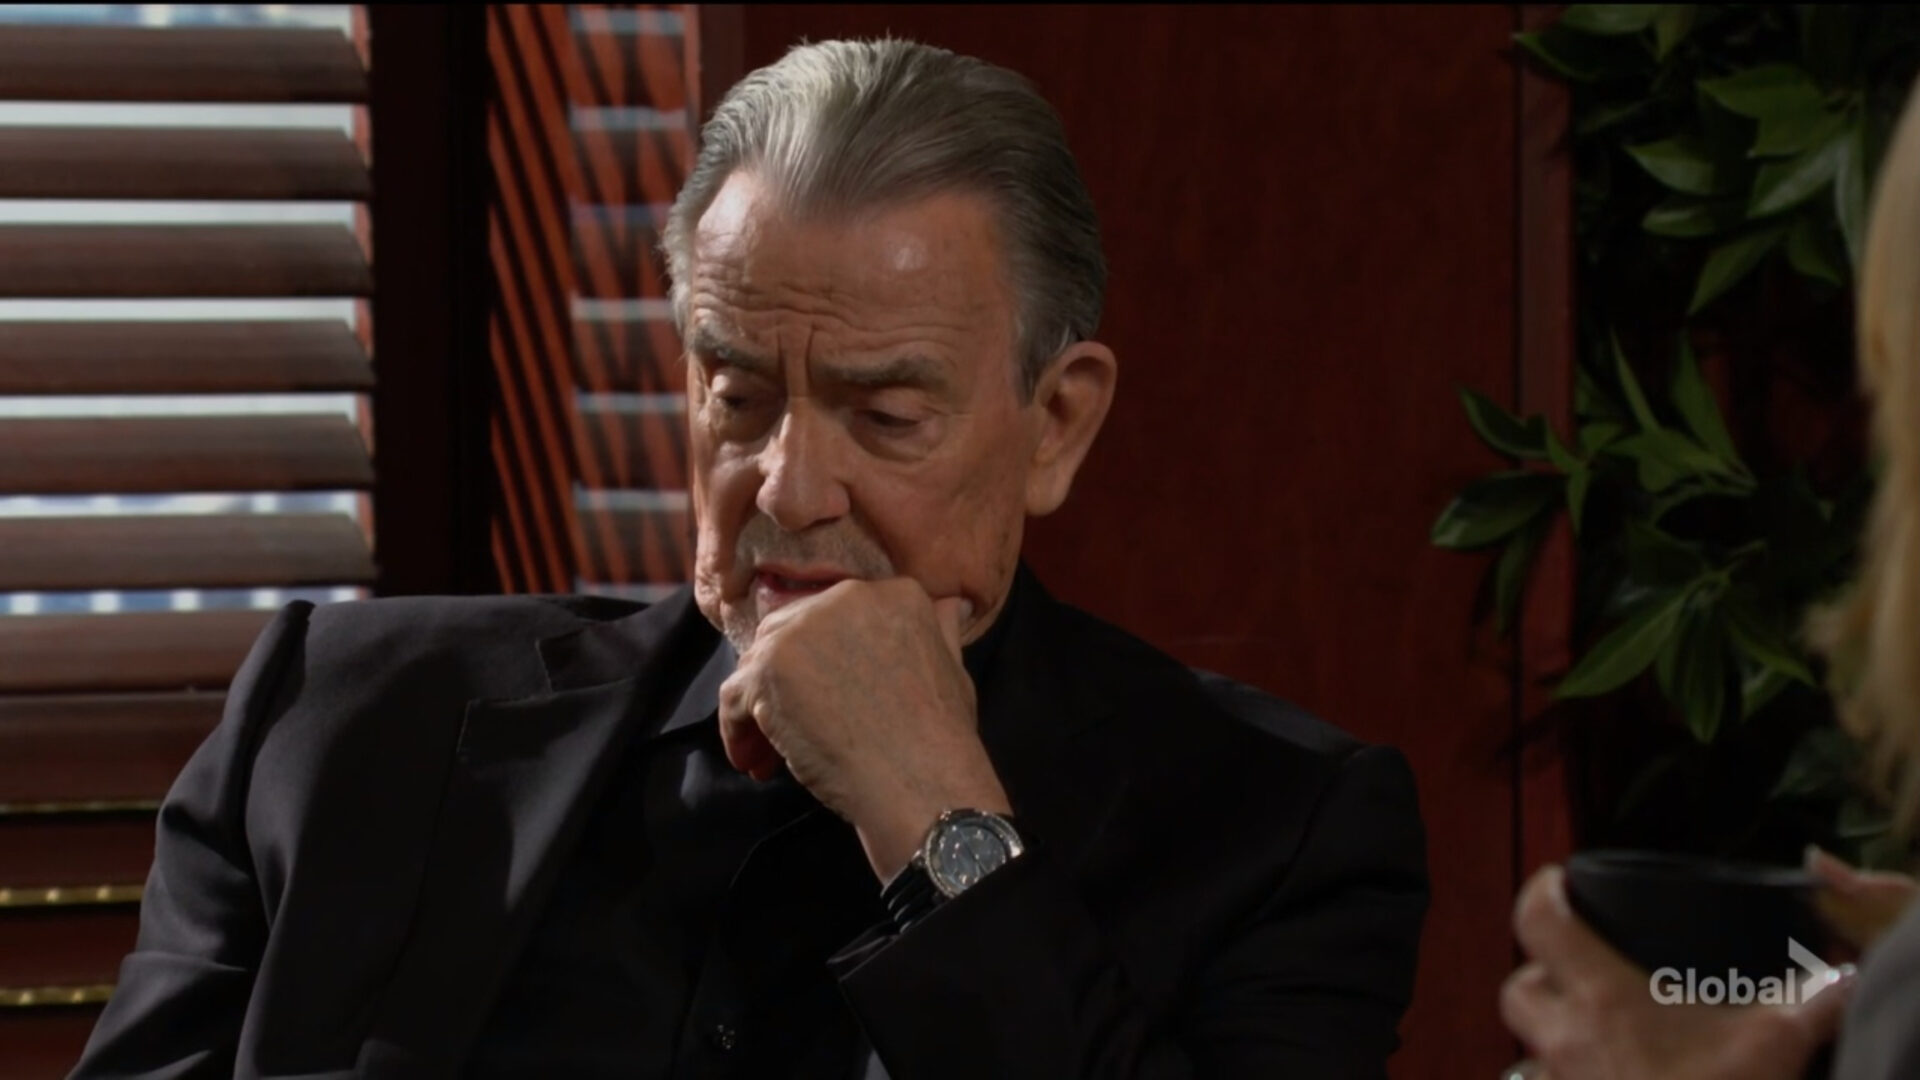 victor newman tells wife to go on a trip